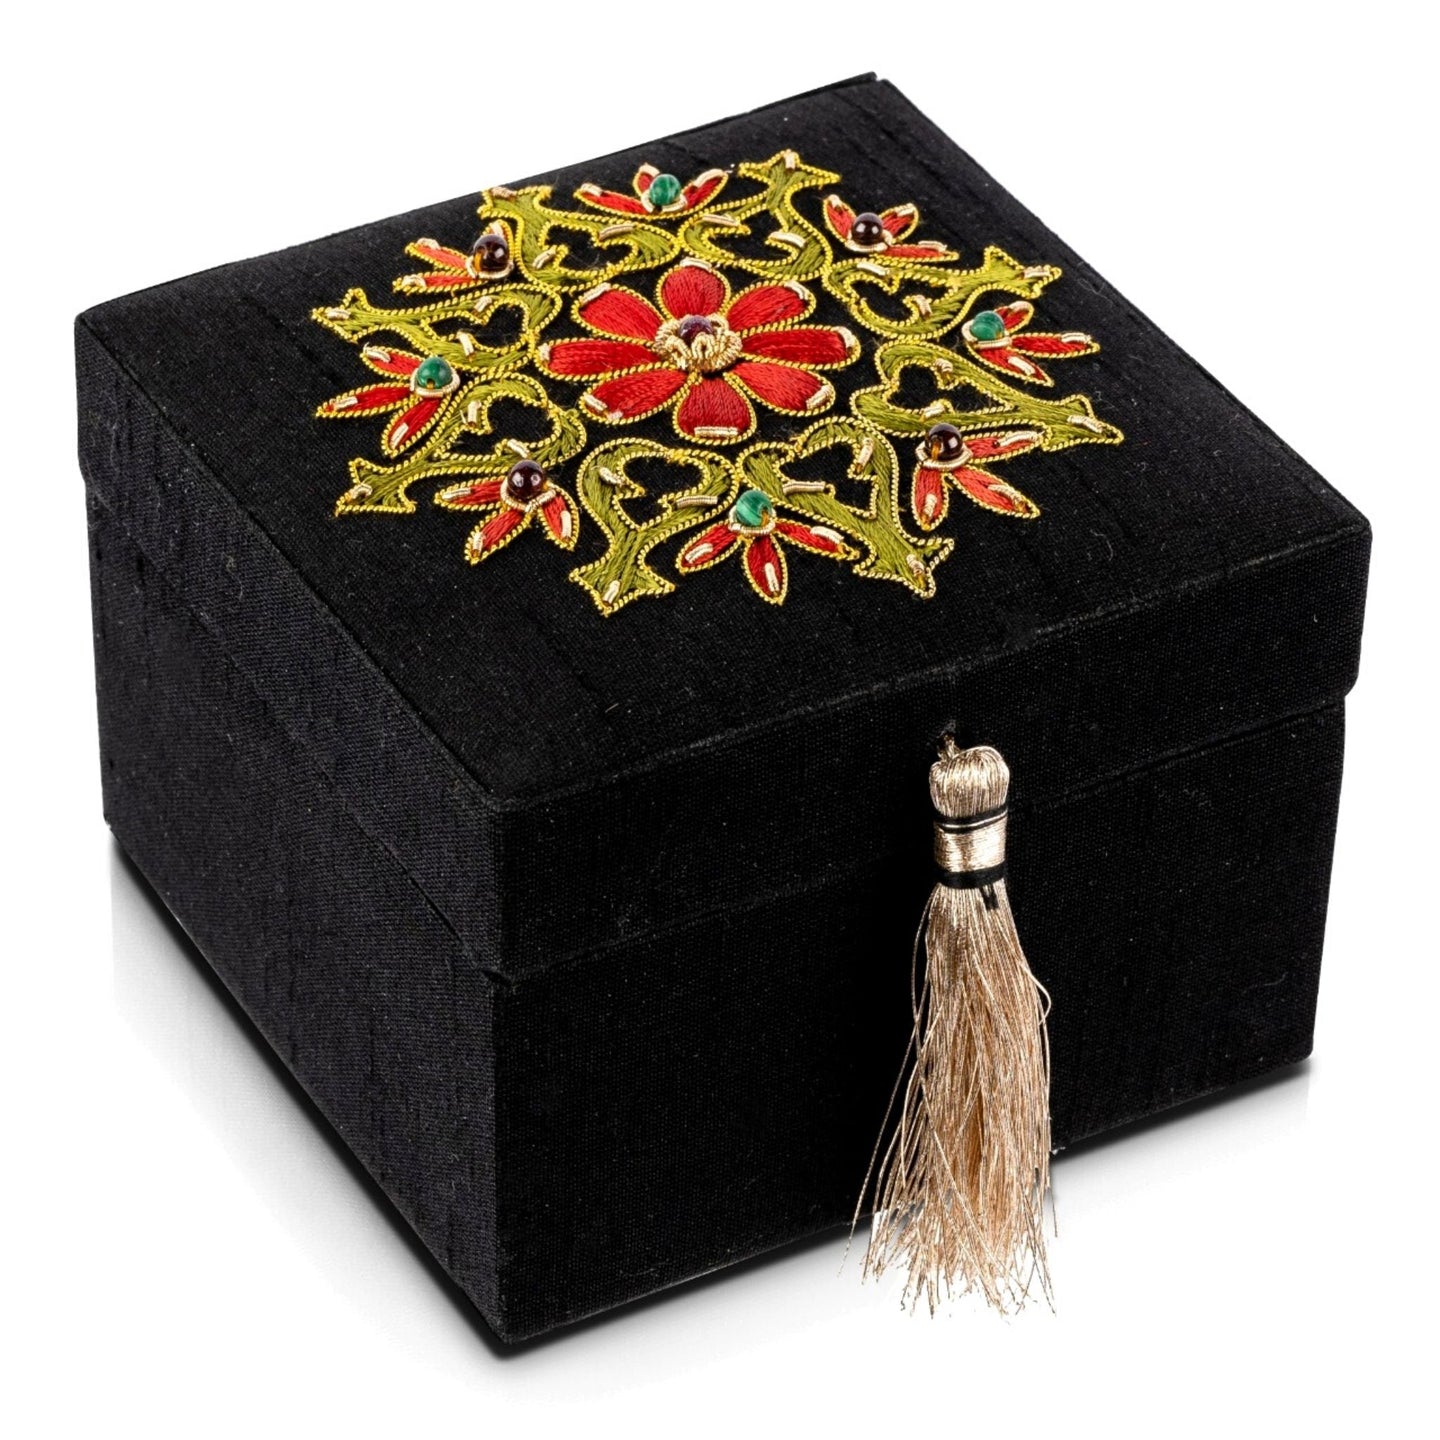 Handmade small square luxury silk jewelry storage box embroidered with red flower and central ruby.